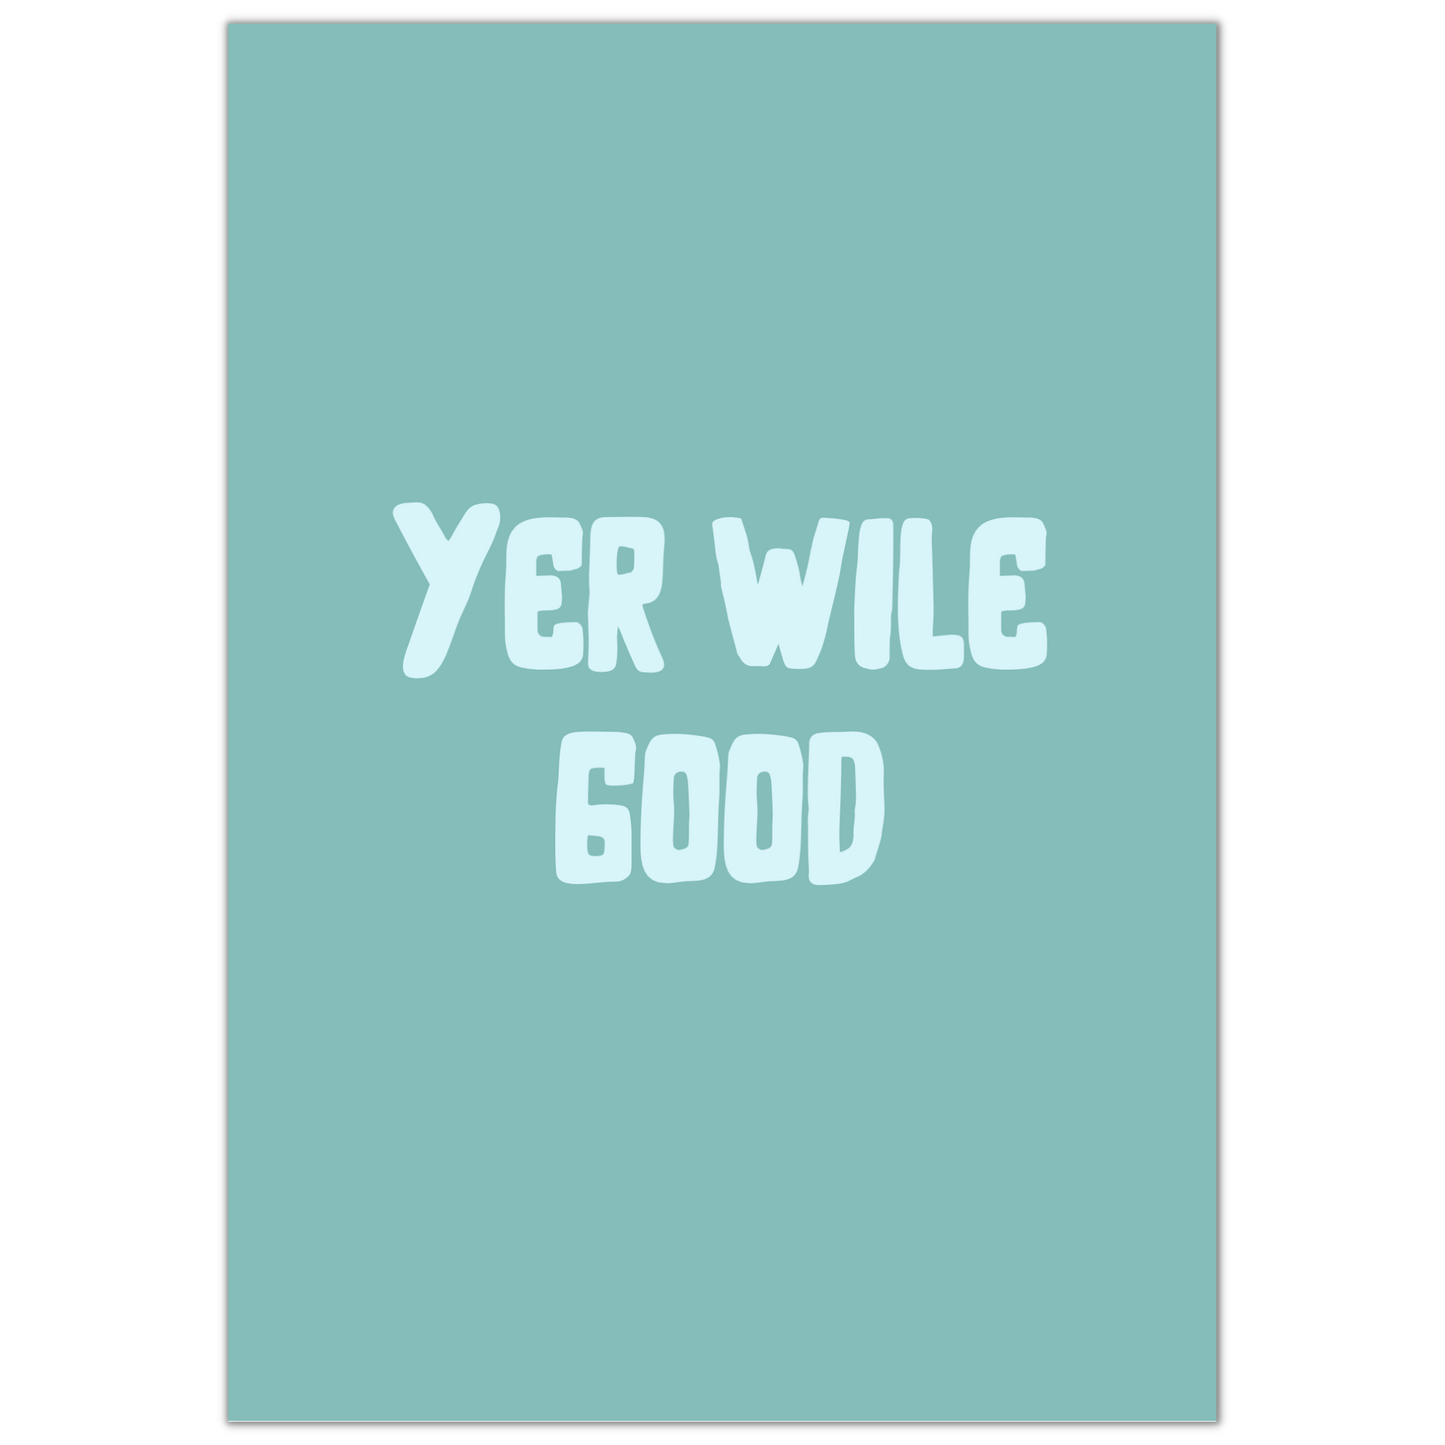 YER WILE GOOD PRINT- NOW £4.80 AT CHECKOUT